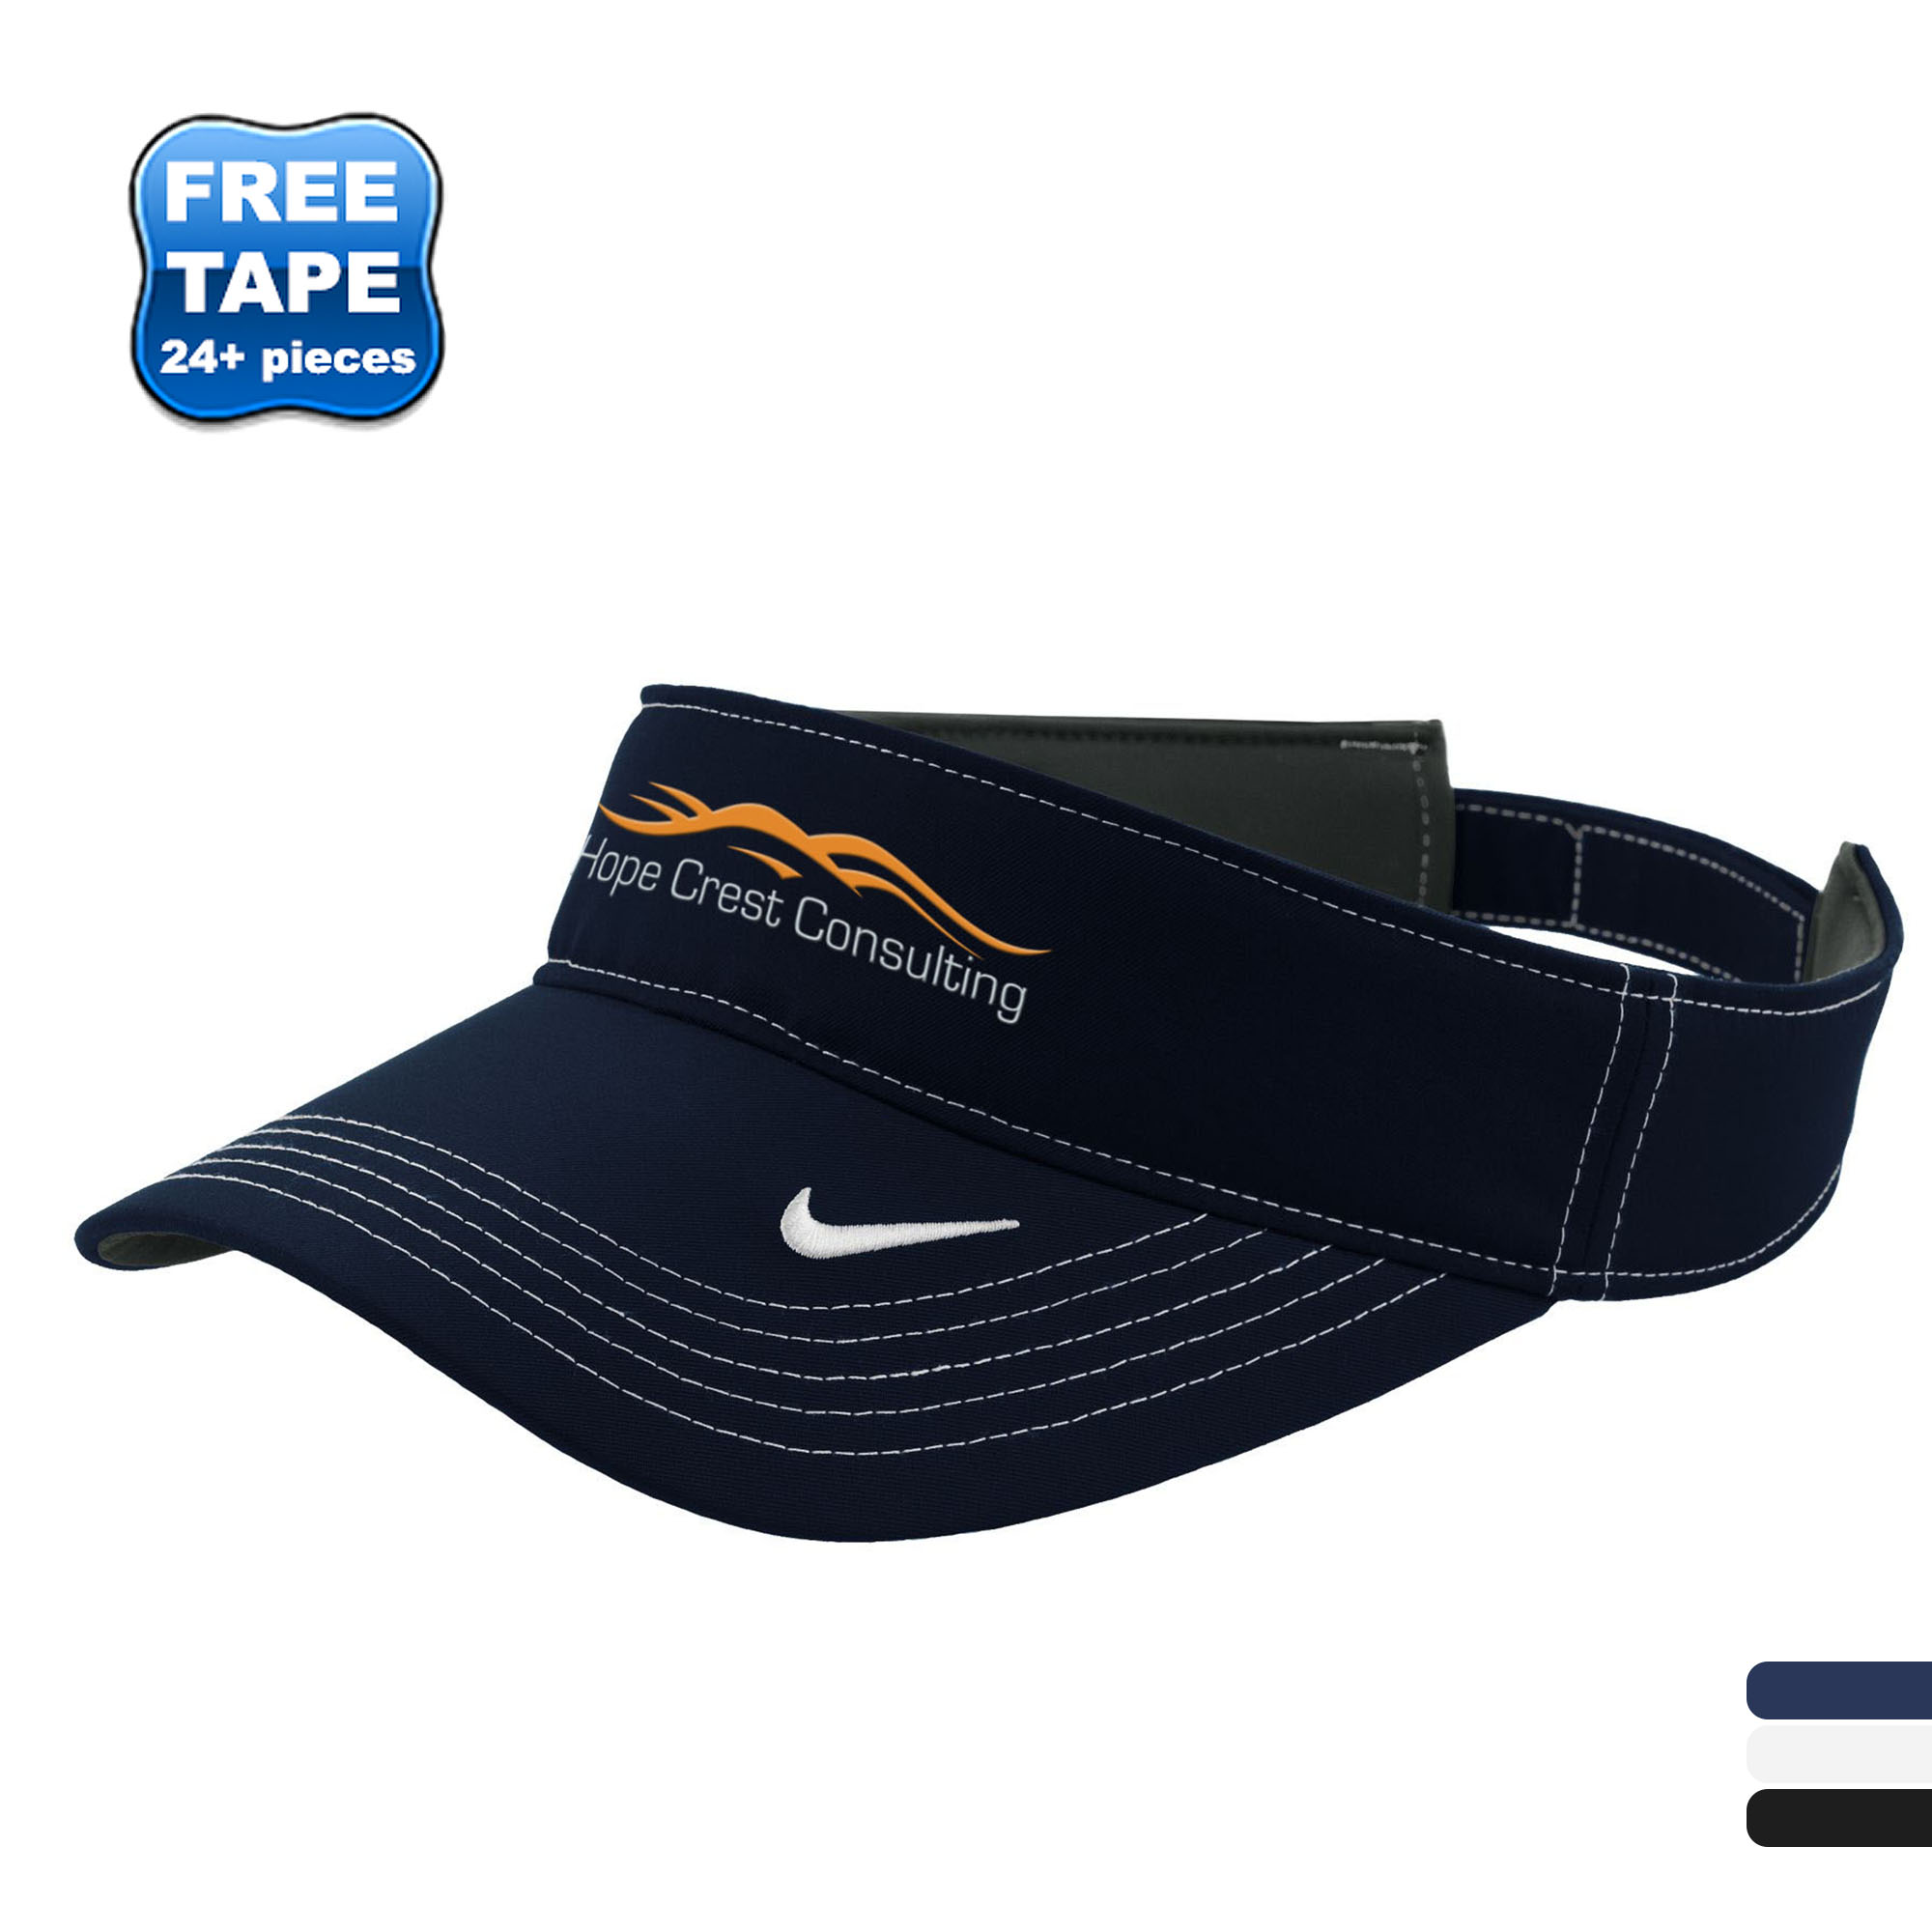 Sunshade hats for men and women - 35134 - IdeaStage Promotional Products